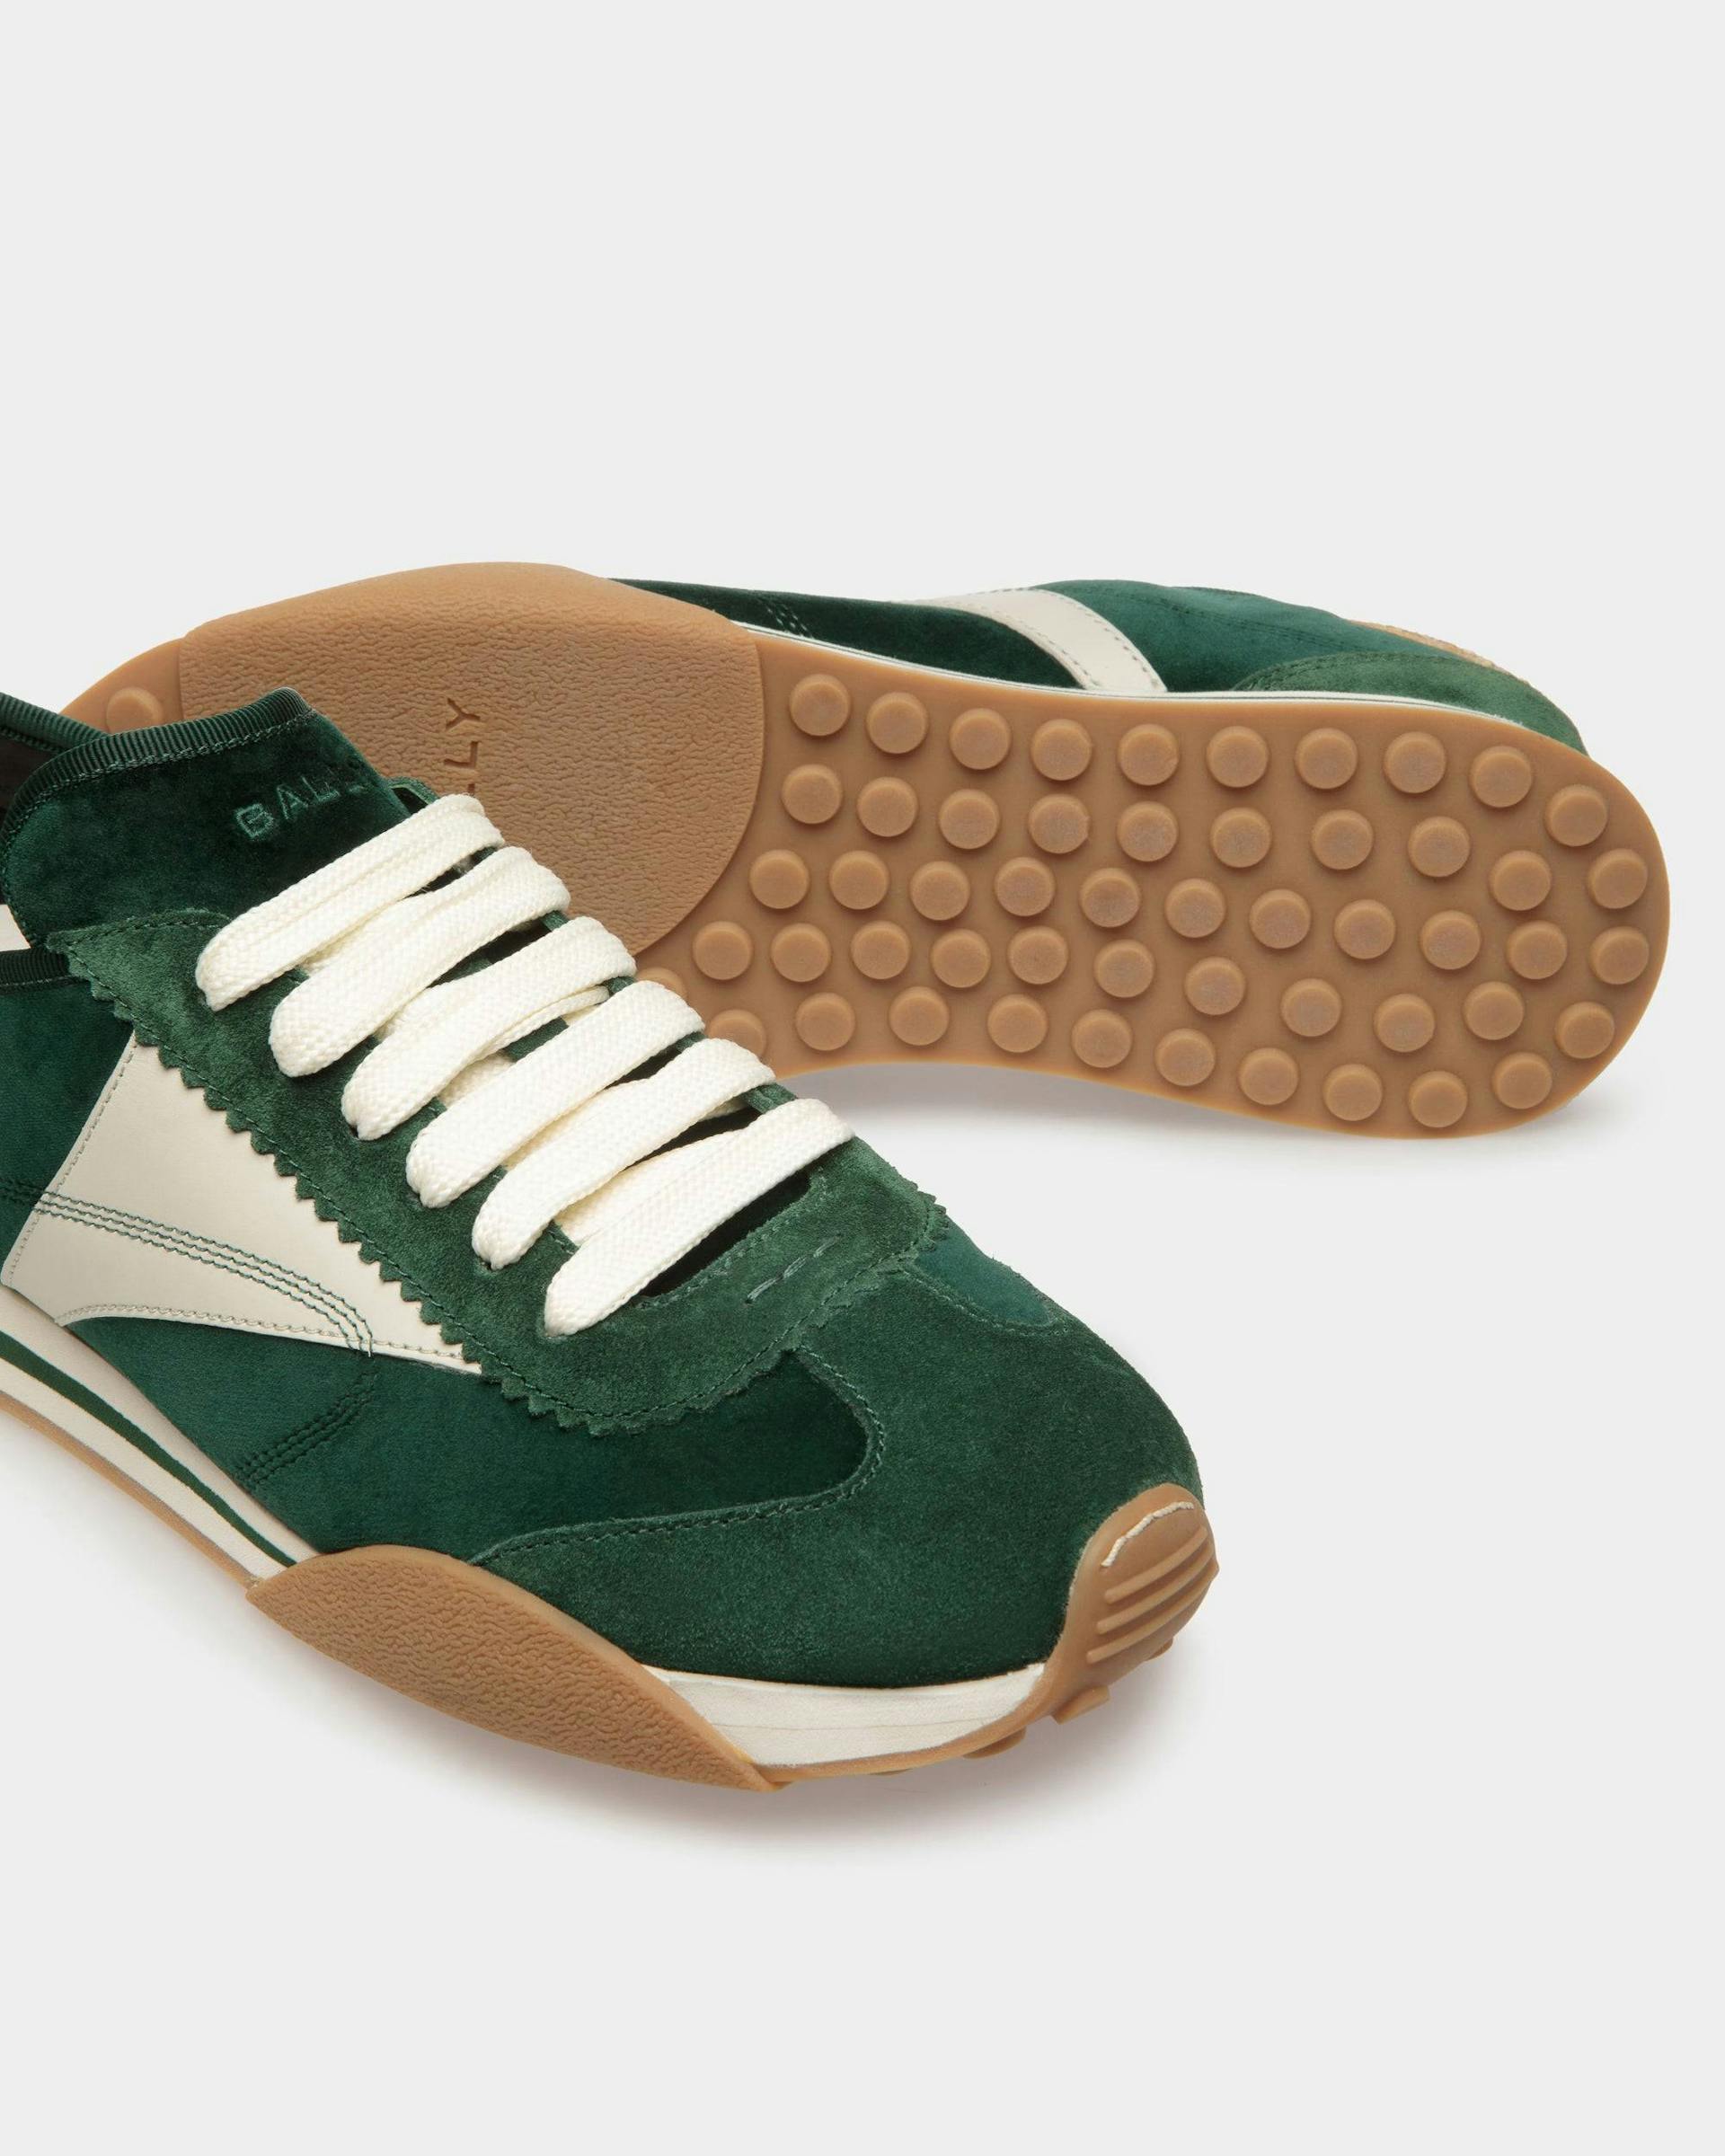 Sussex Sneakers In Green And Dusty White Leather And Cotton - Men's - Bally - 05